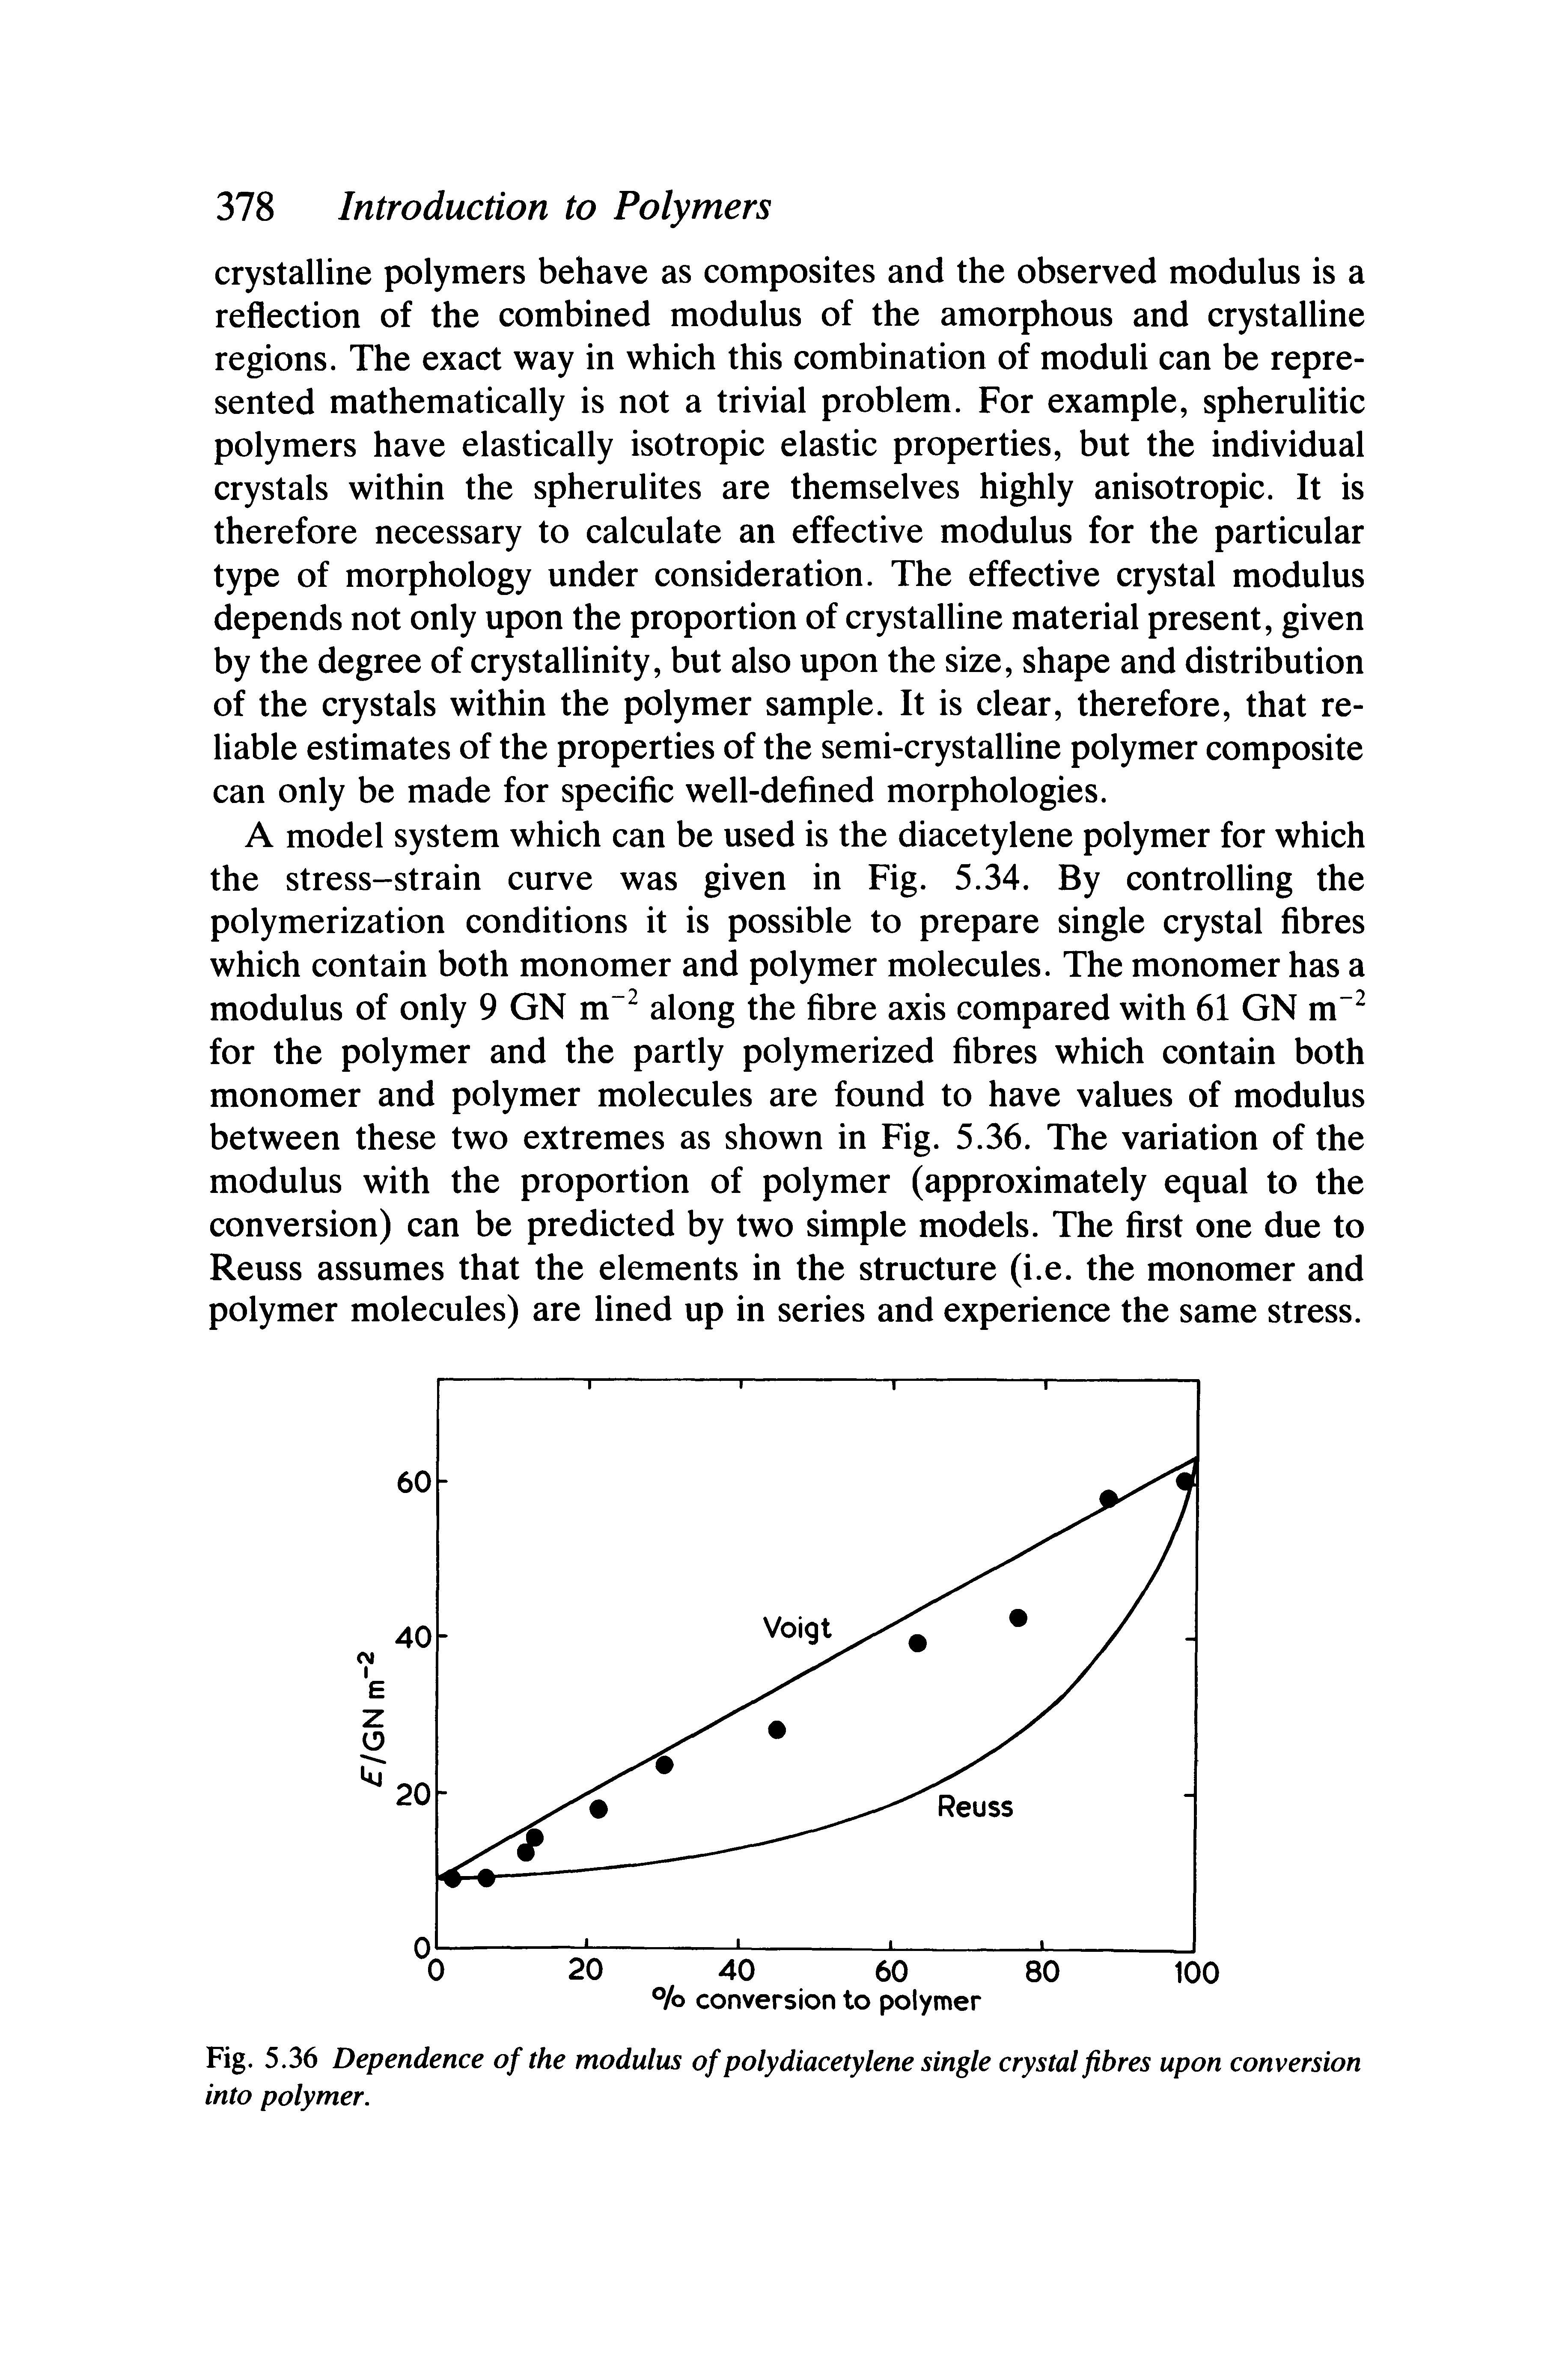 Fig. 5.36 Dependence of the modulus of polydiacetylene single crystal fibres upon conversion into polymer.